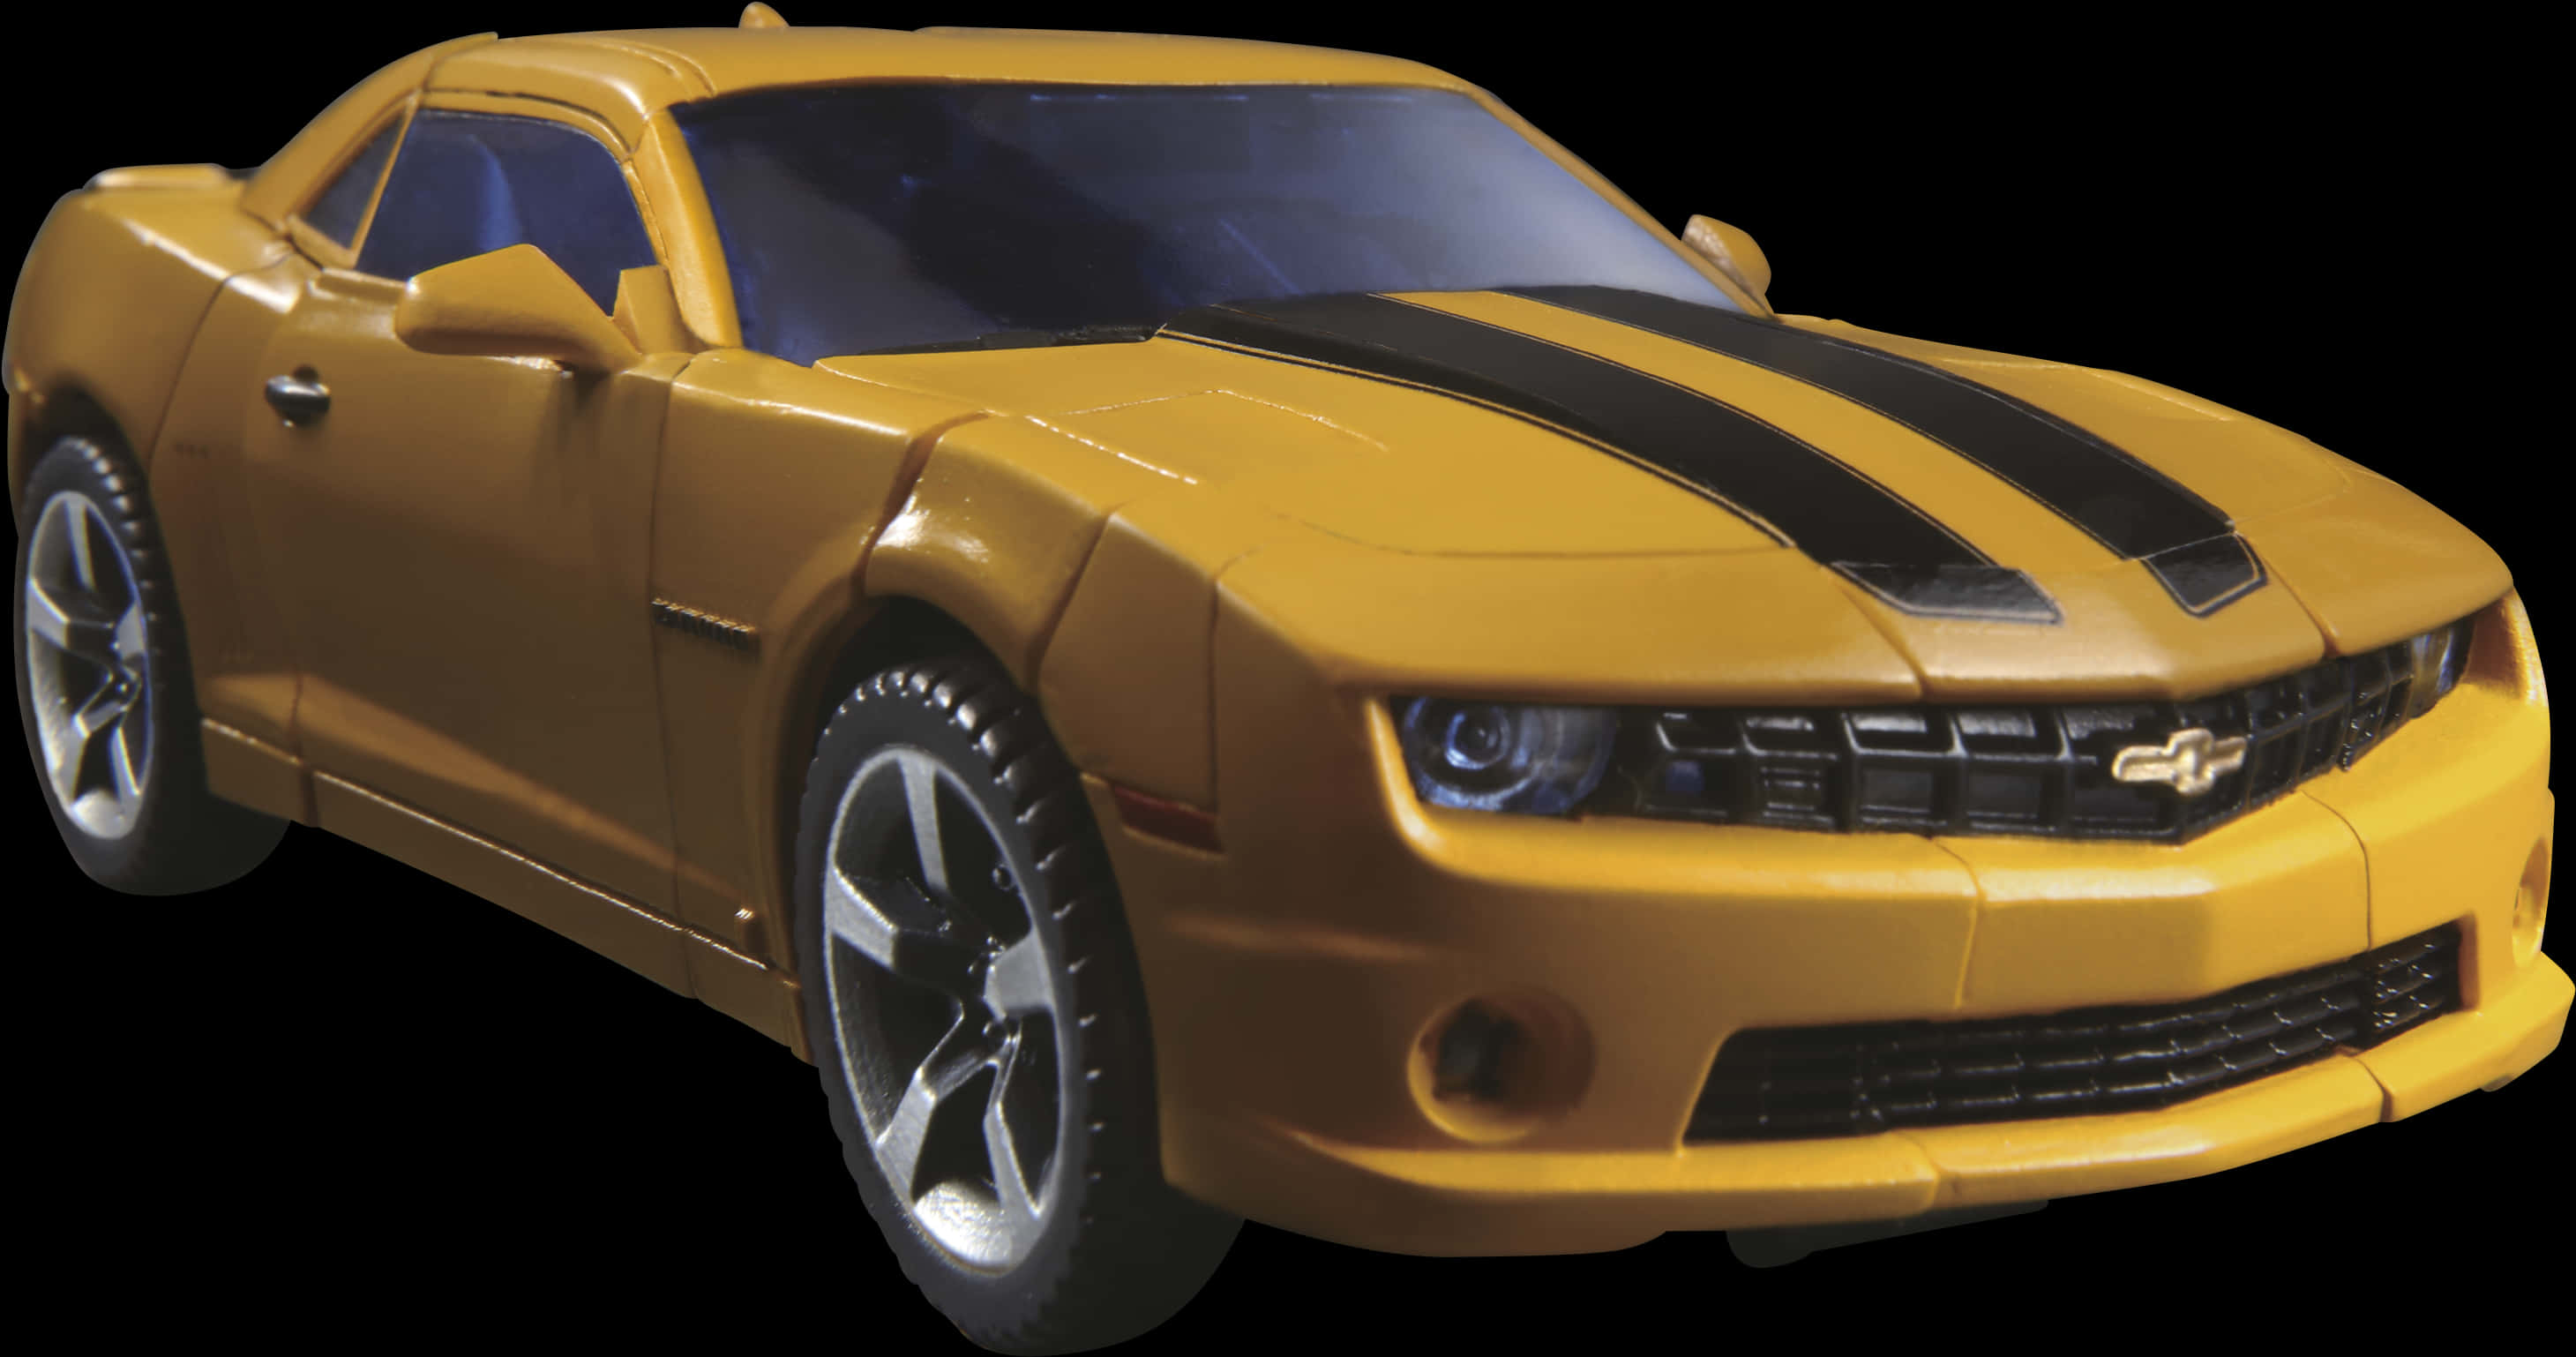 A Yellow Toy Car With Black Stripes